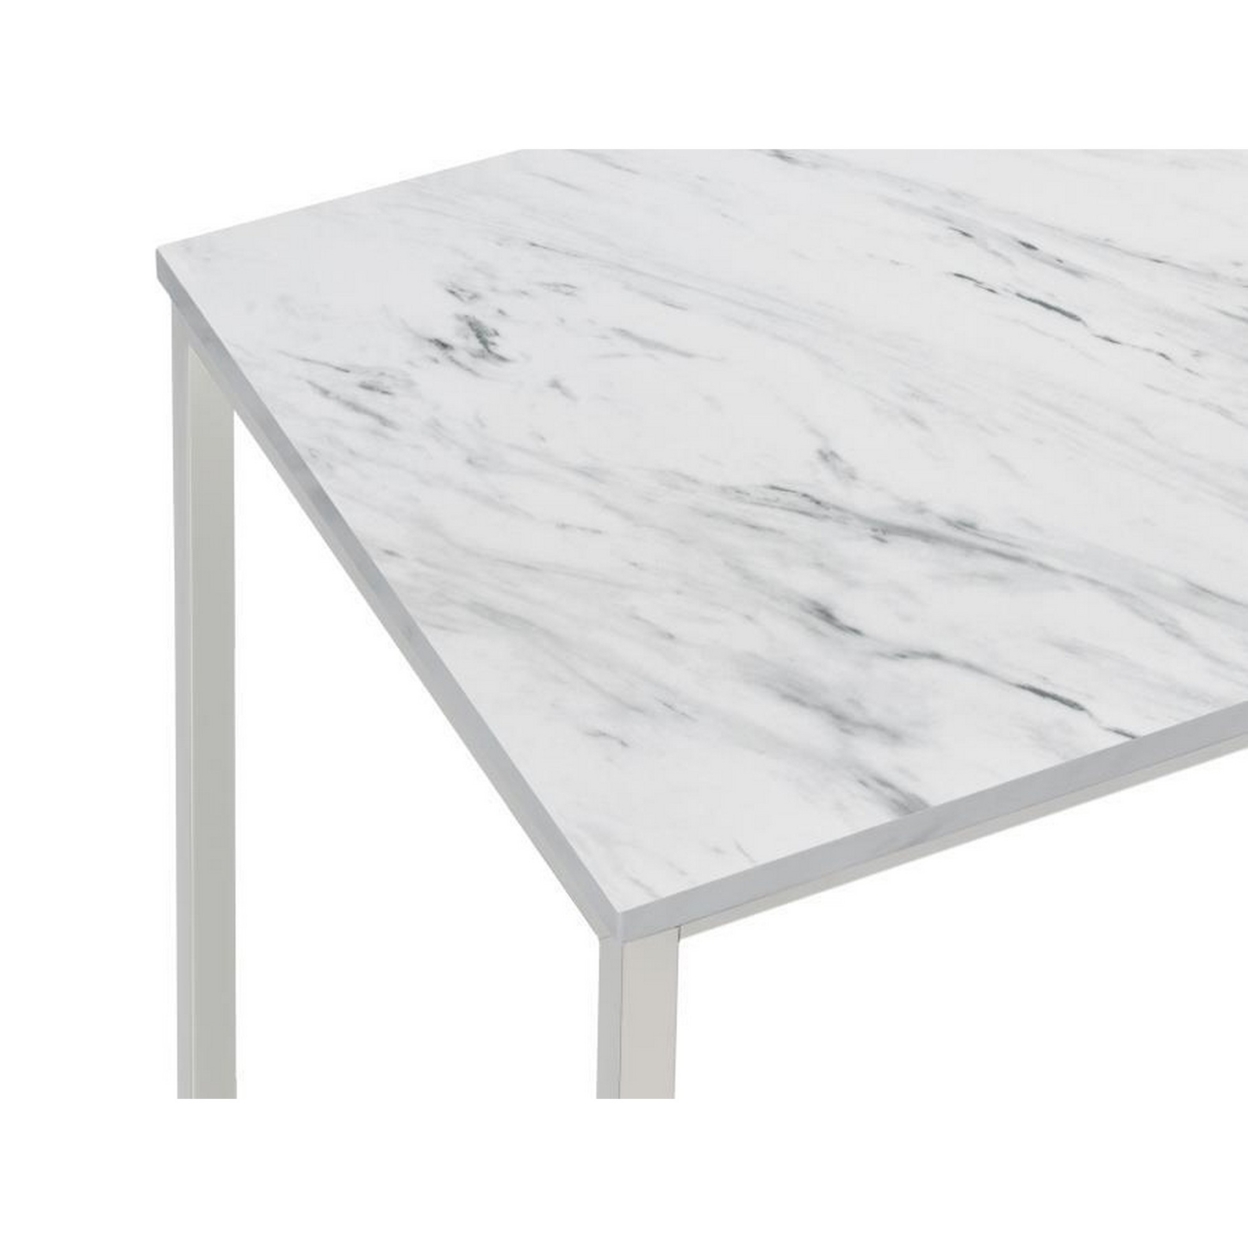 46 Inch Coffee Table, Faux Marble Surface, Silver Finished Geometric Base